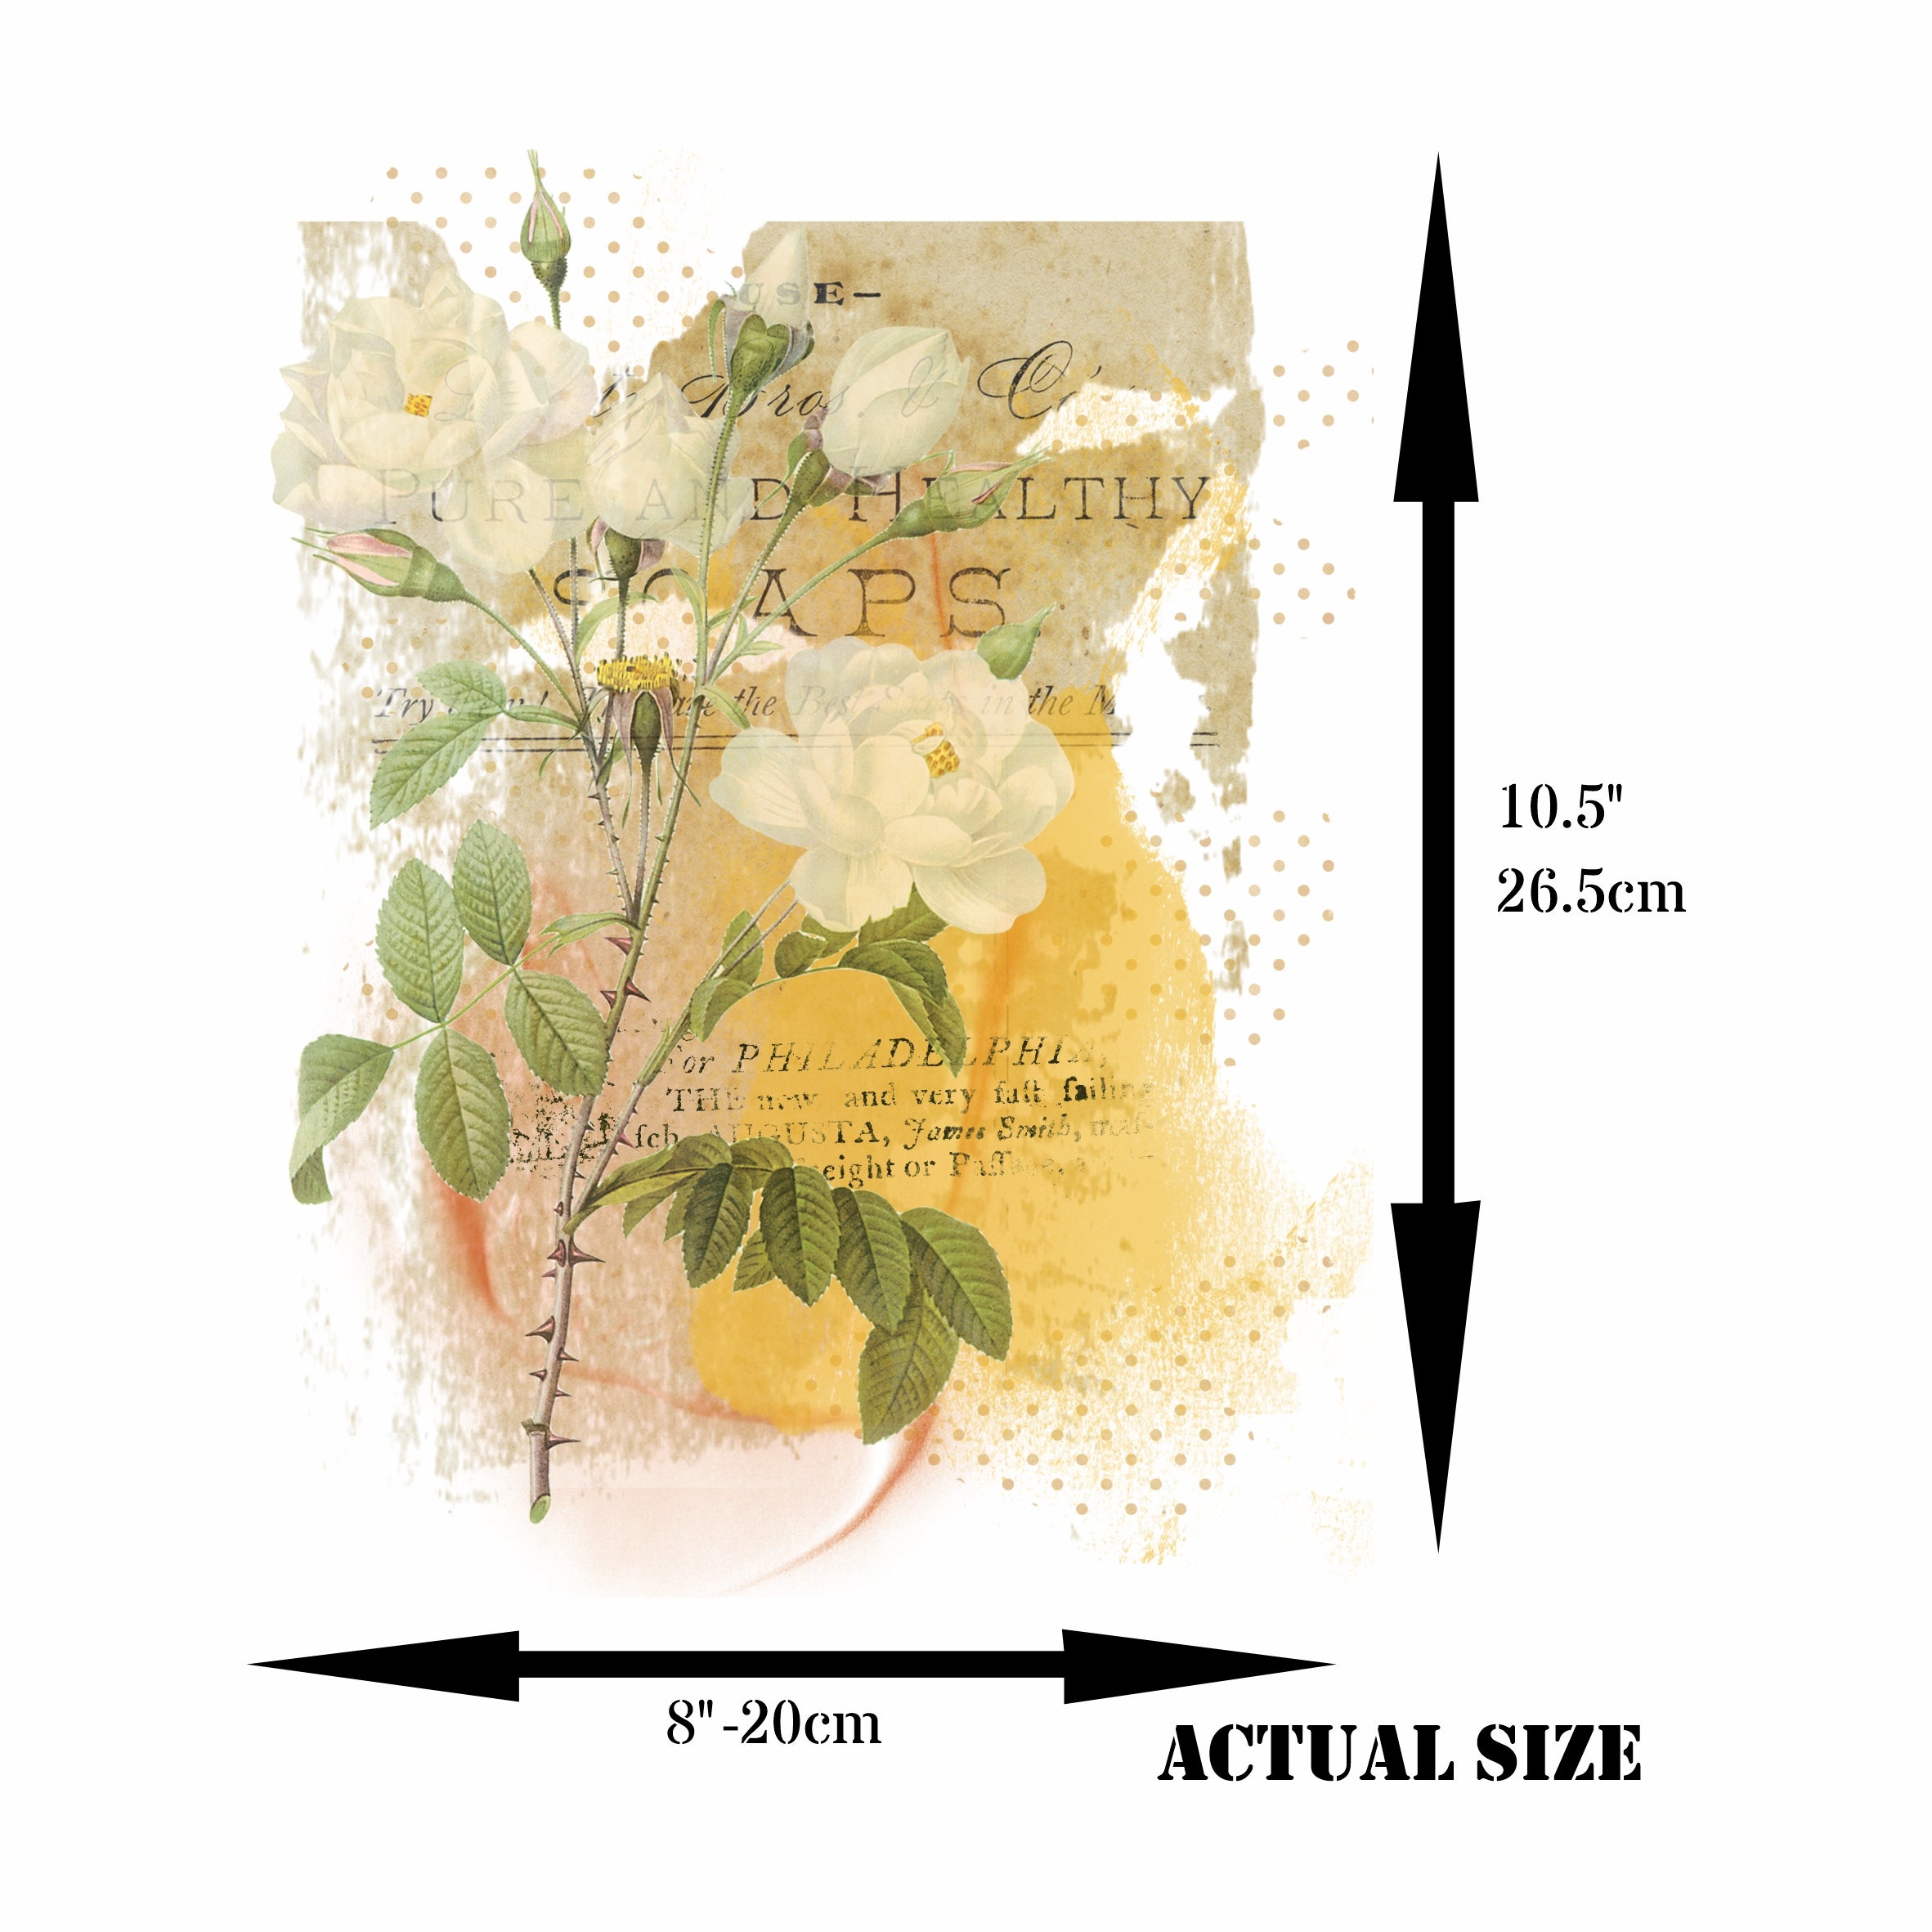 Floral Overlay Rice Paper- 6 x Printed Mulberry Paper Images 30gsm